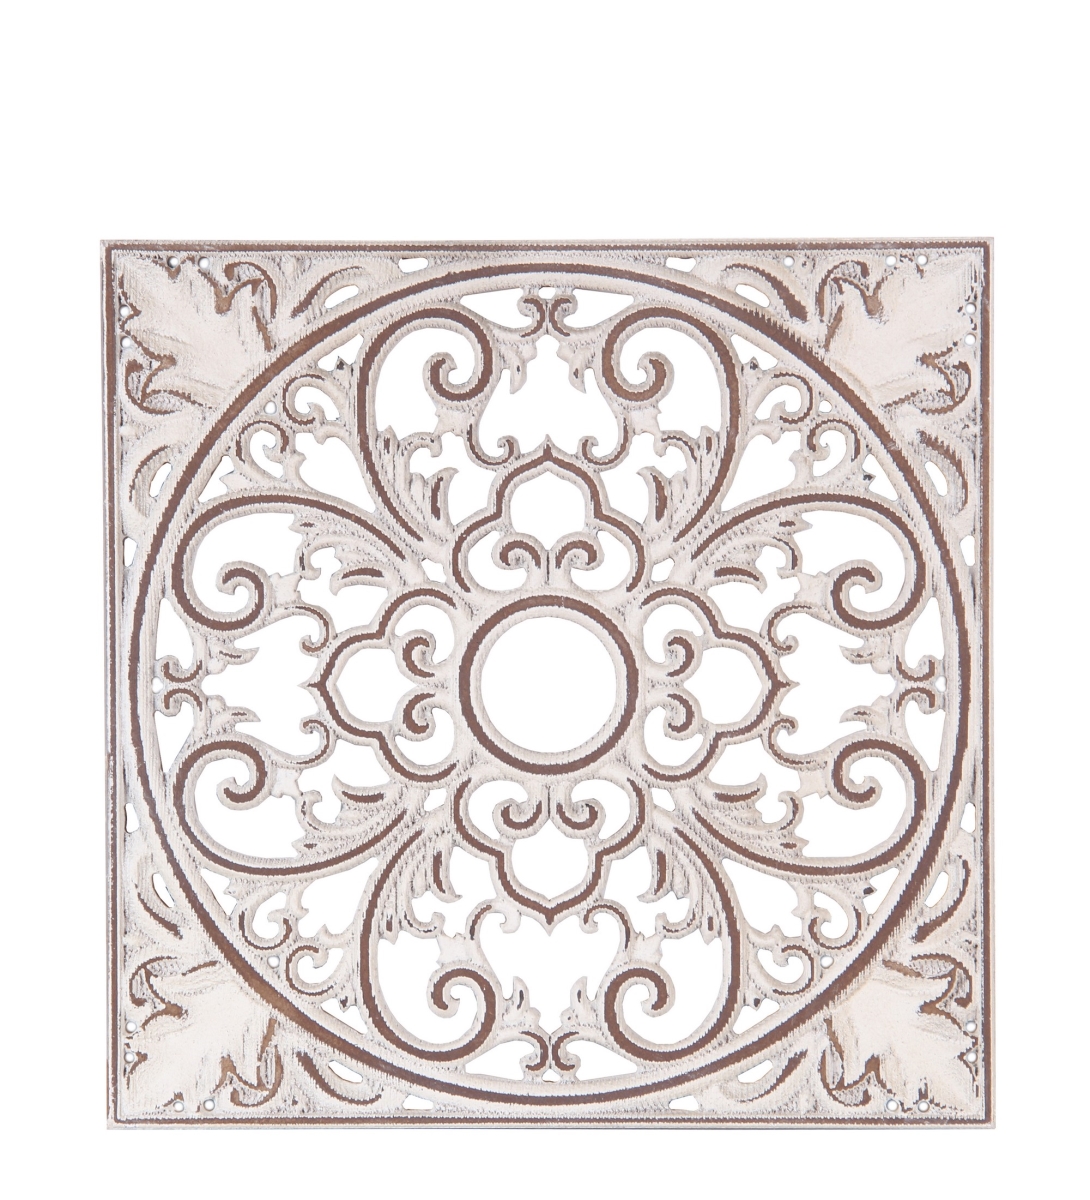 30149 12 X 0.5 X 12 In. Carved Wood Wall Decor, Off-white